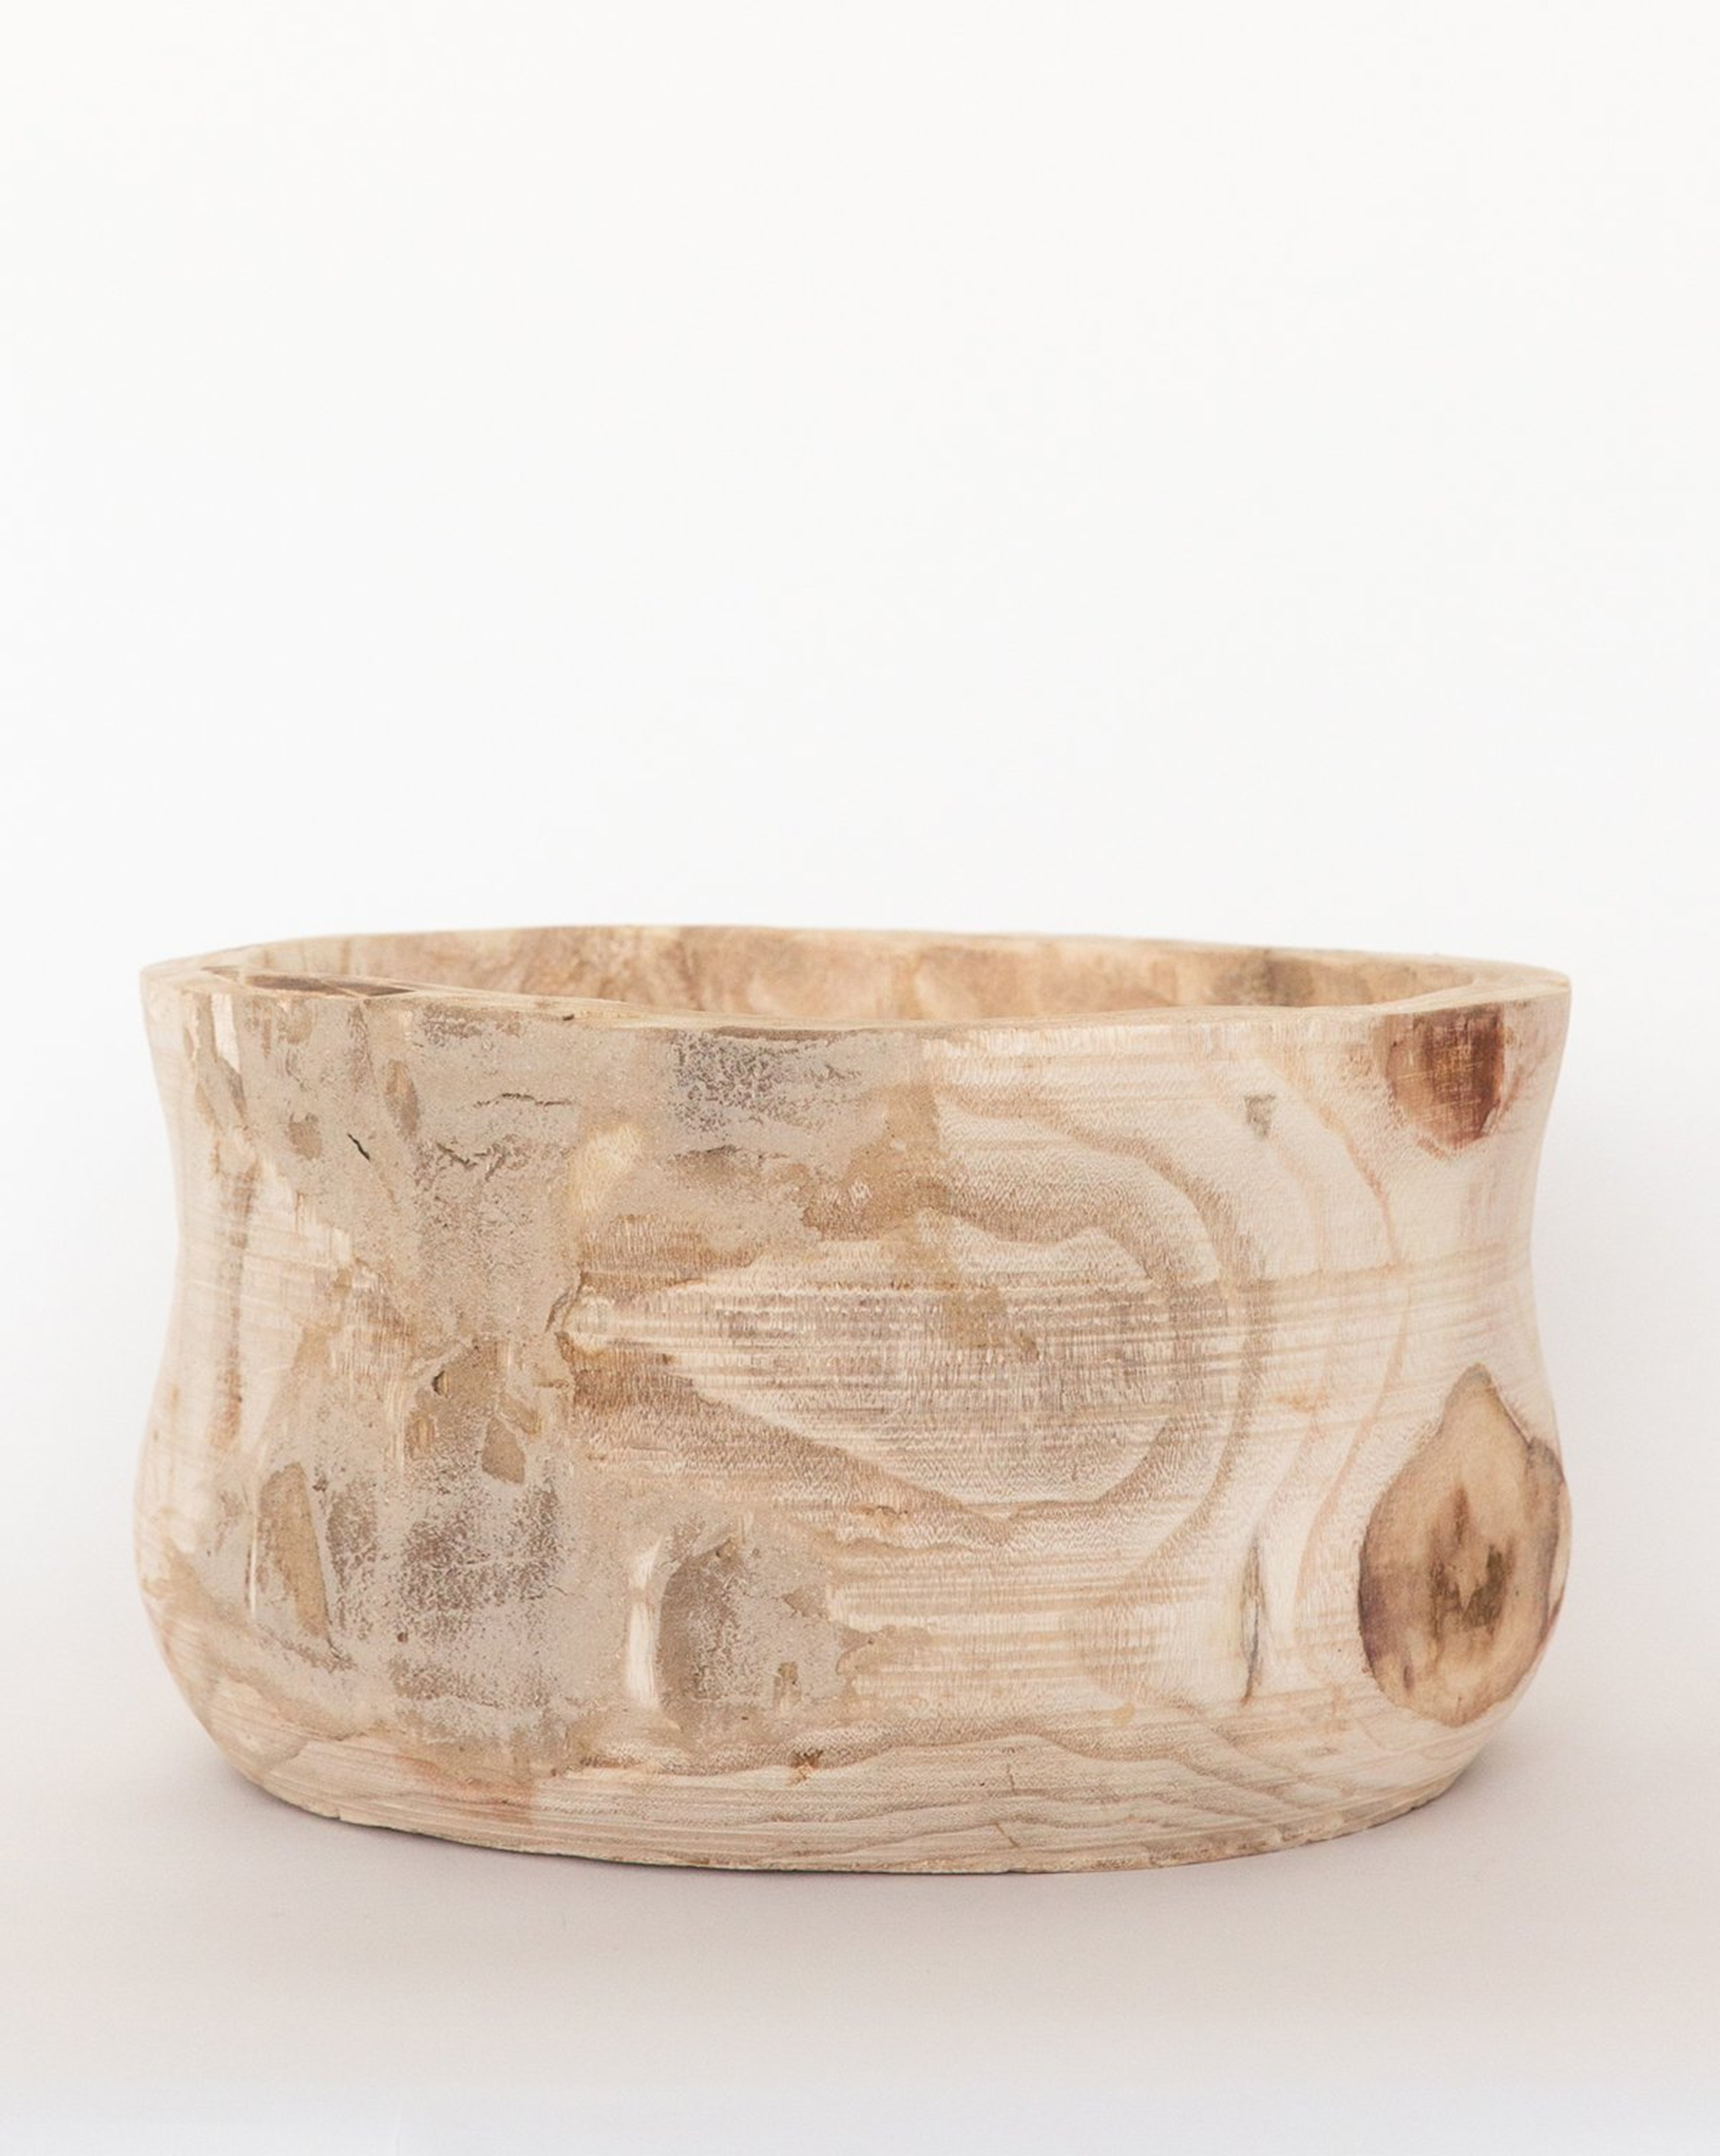 WOODEN BOWL - LARGE - McGee & Co.